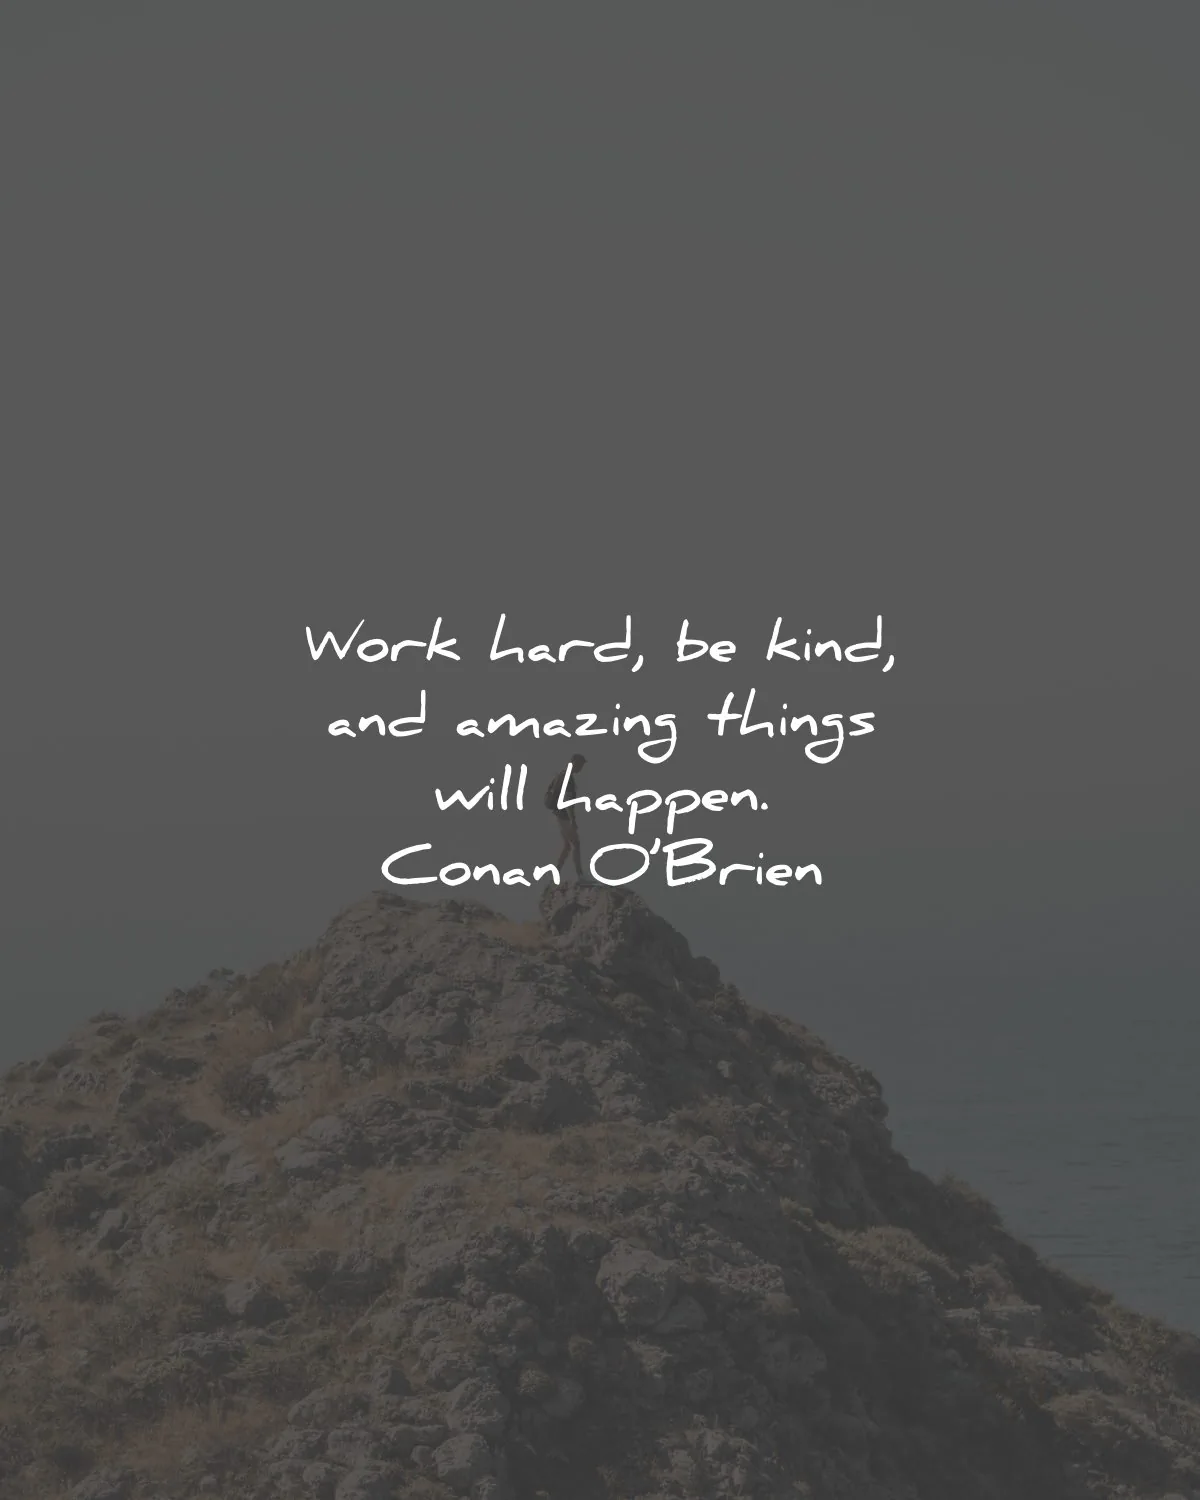 hard work quotes be kind amazing things happen conan obrien wisdom